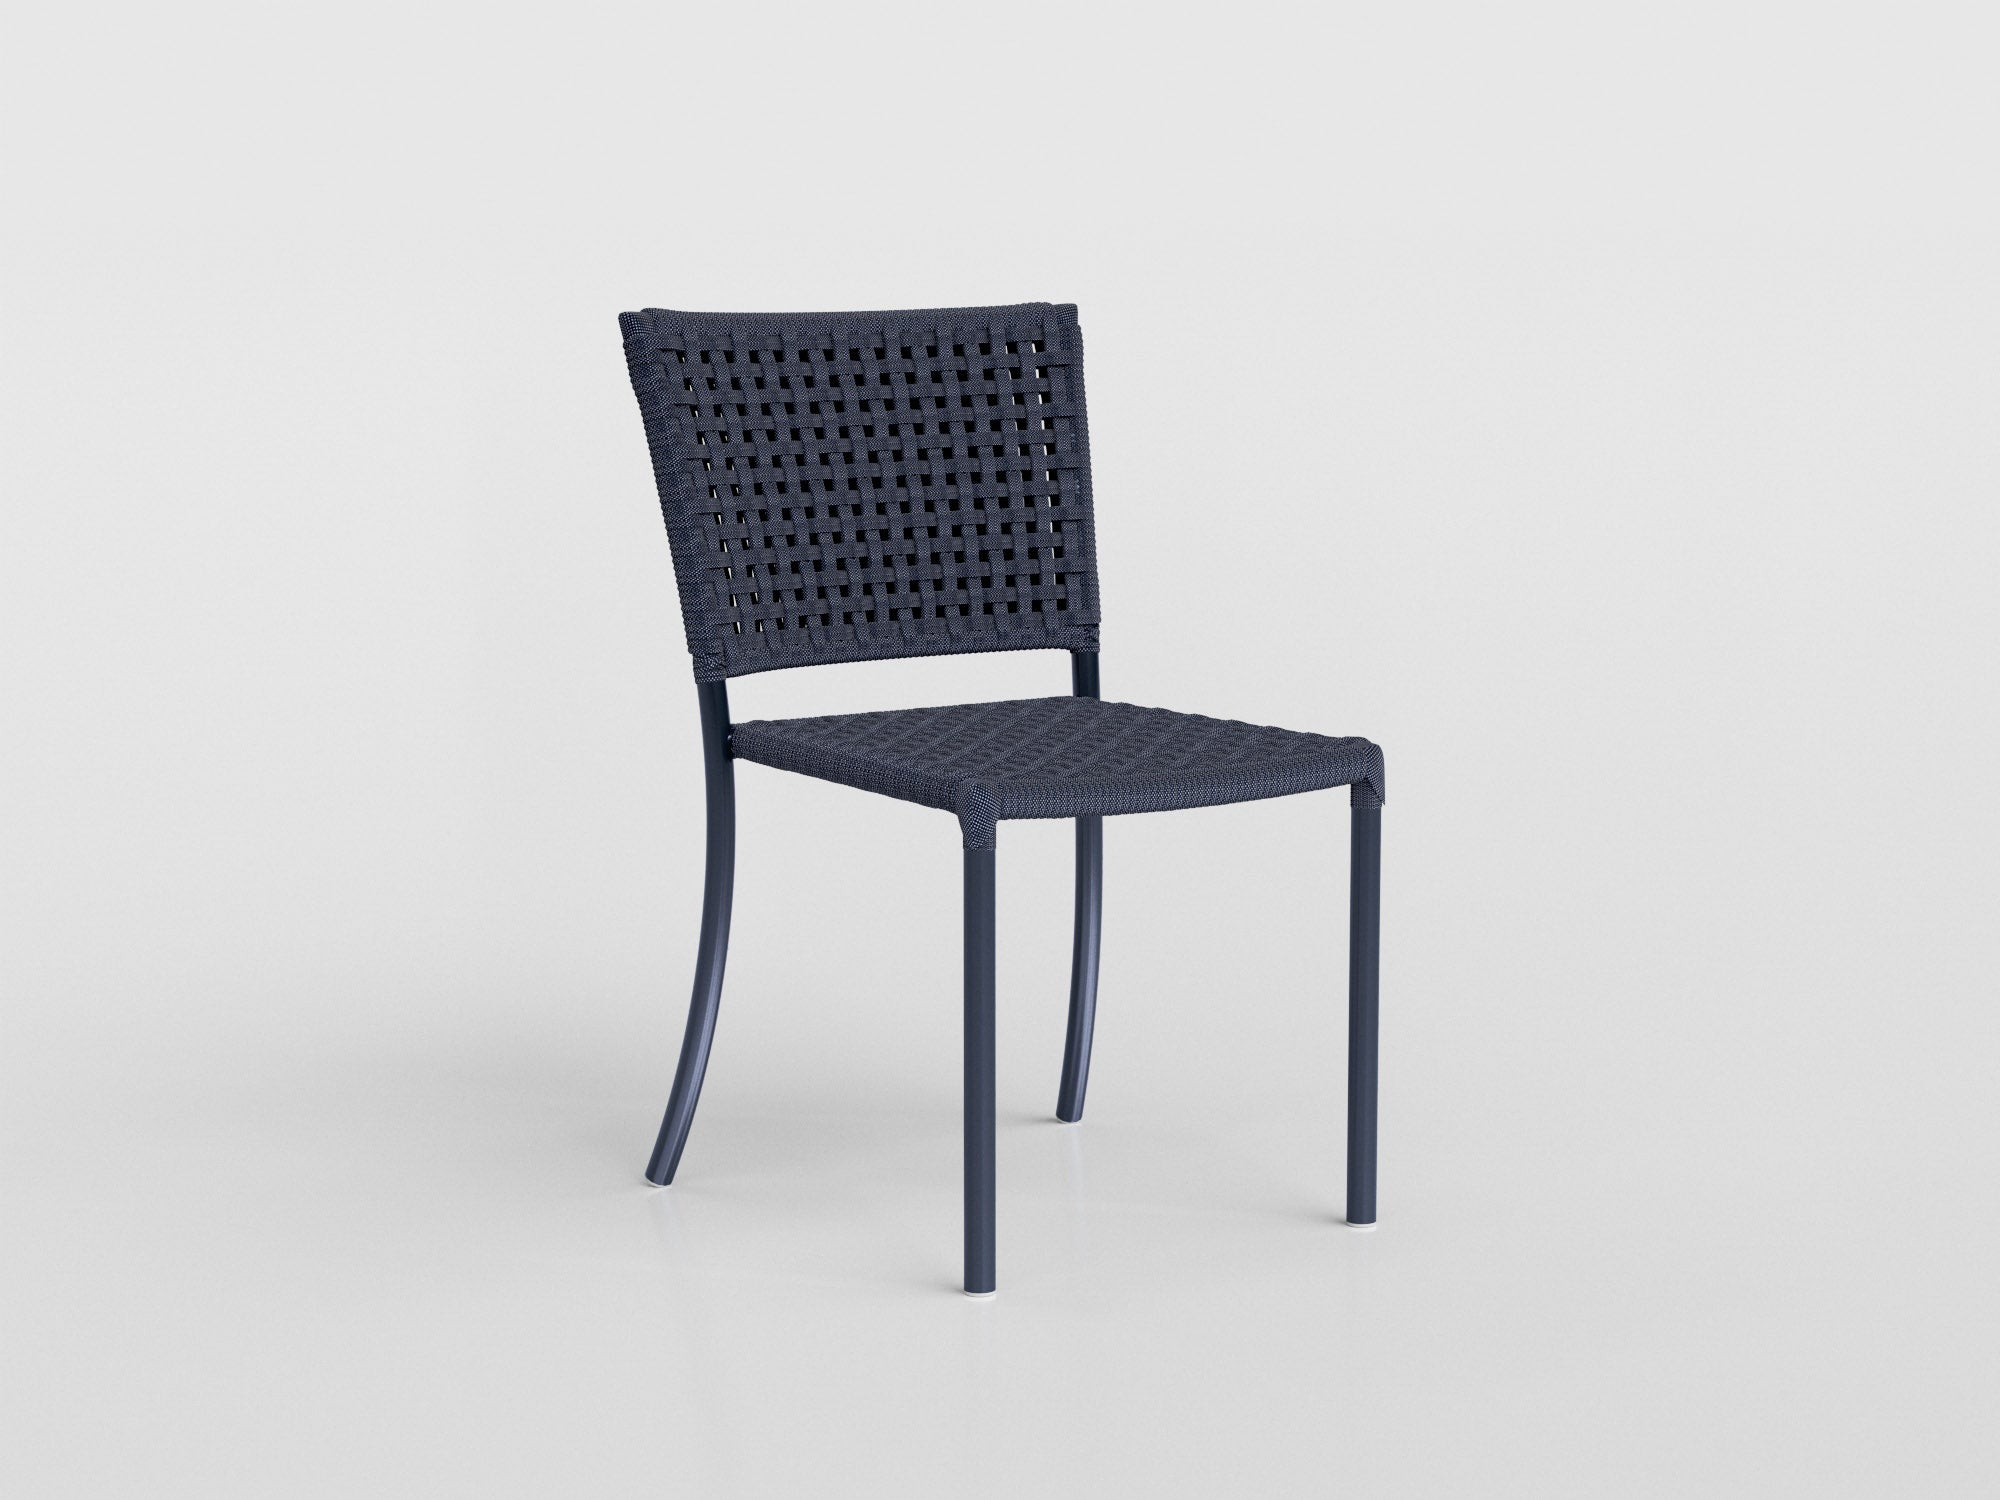 Giardino Chair made of aluminium with braided nautical rope seat and back, designed by Luciano Mandelli